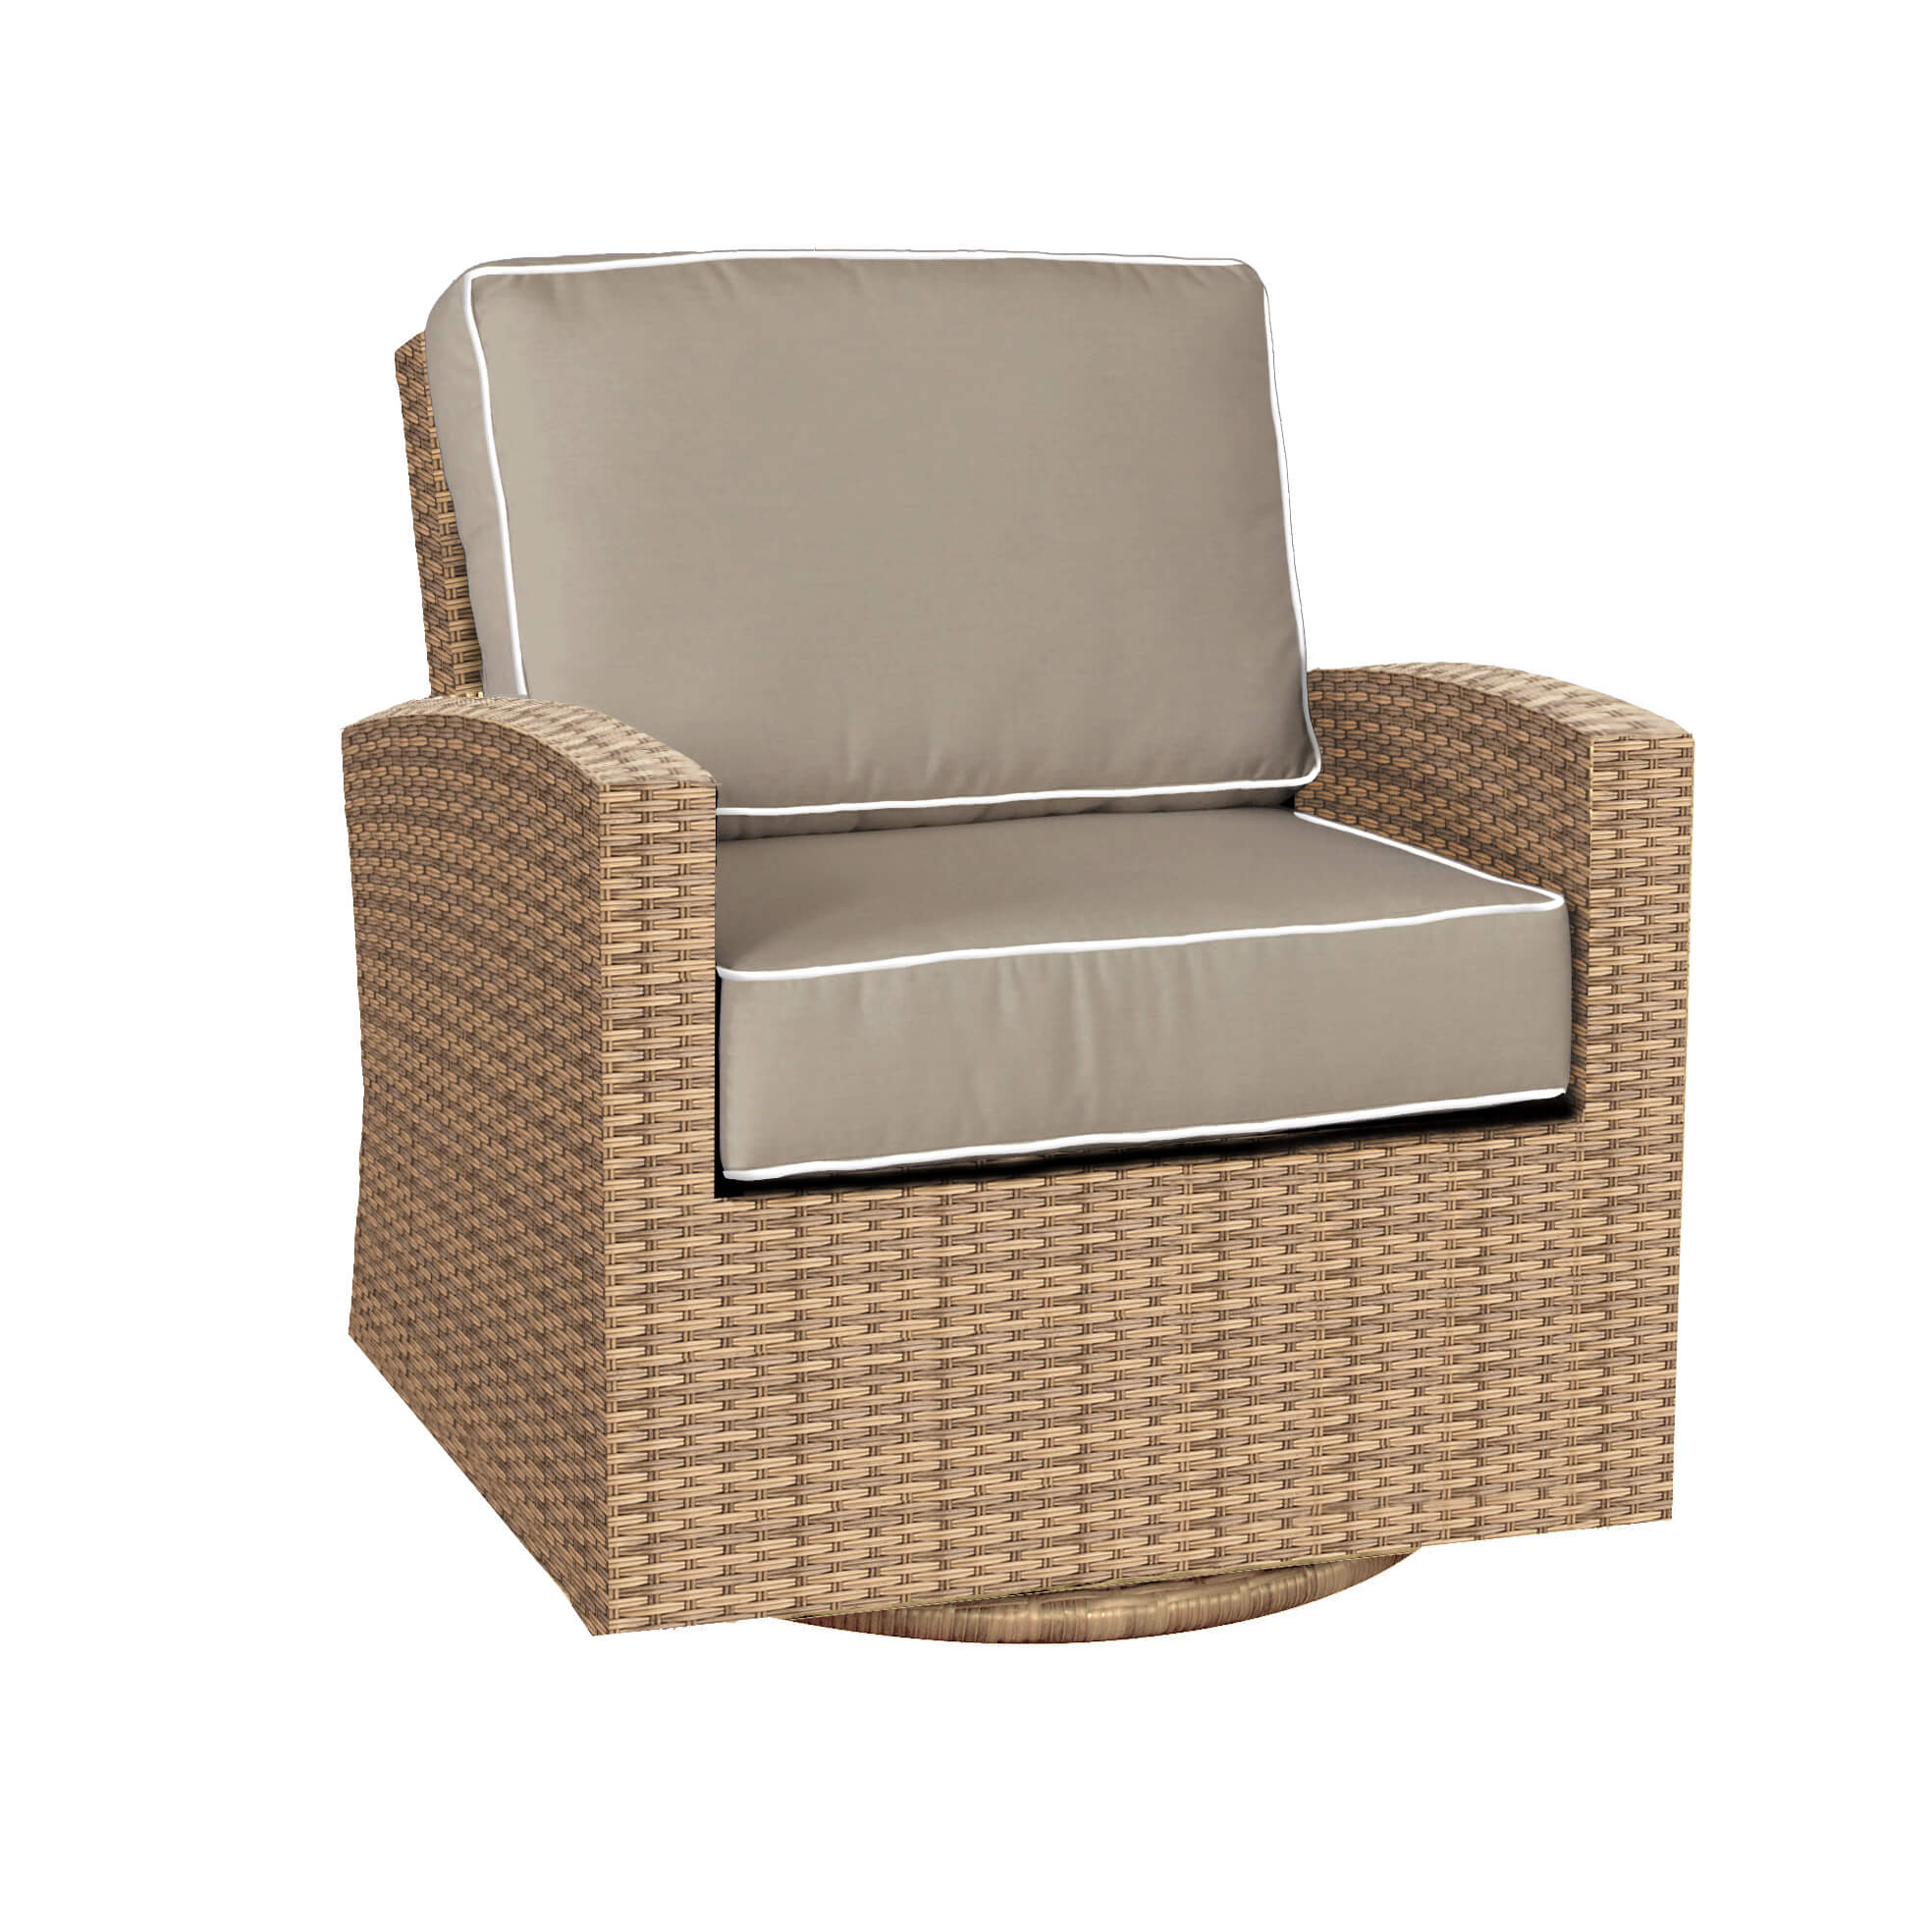 Barbados Swivel Glider Club Chair – Forever Patio